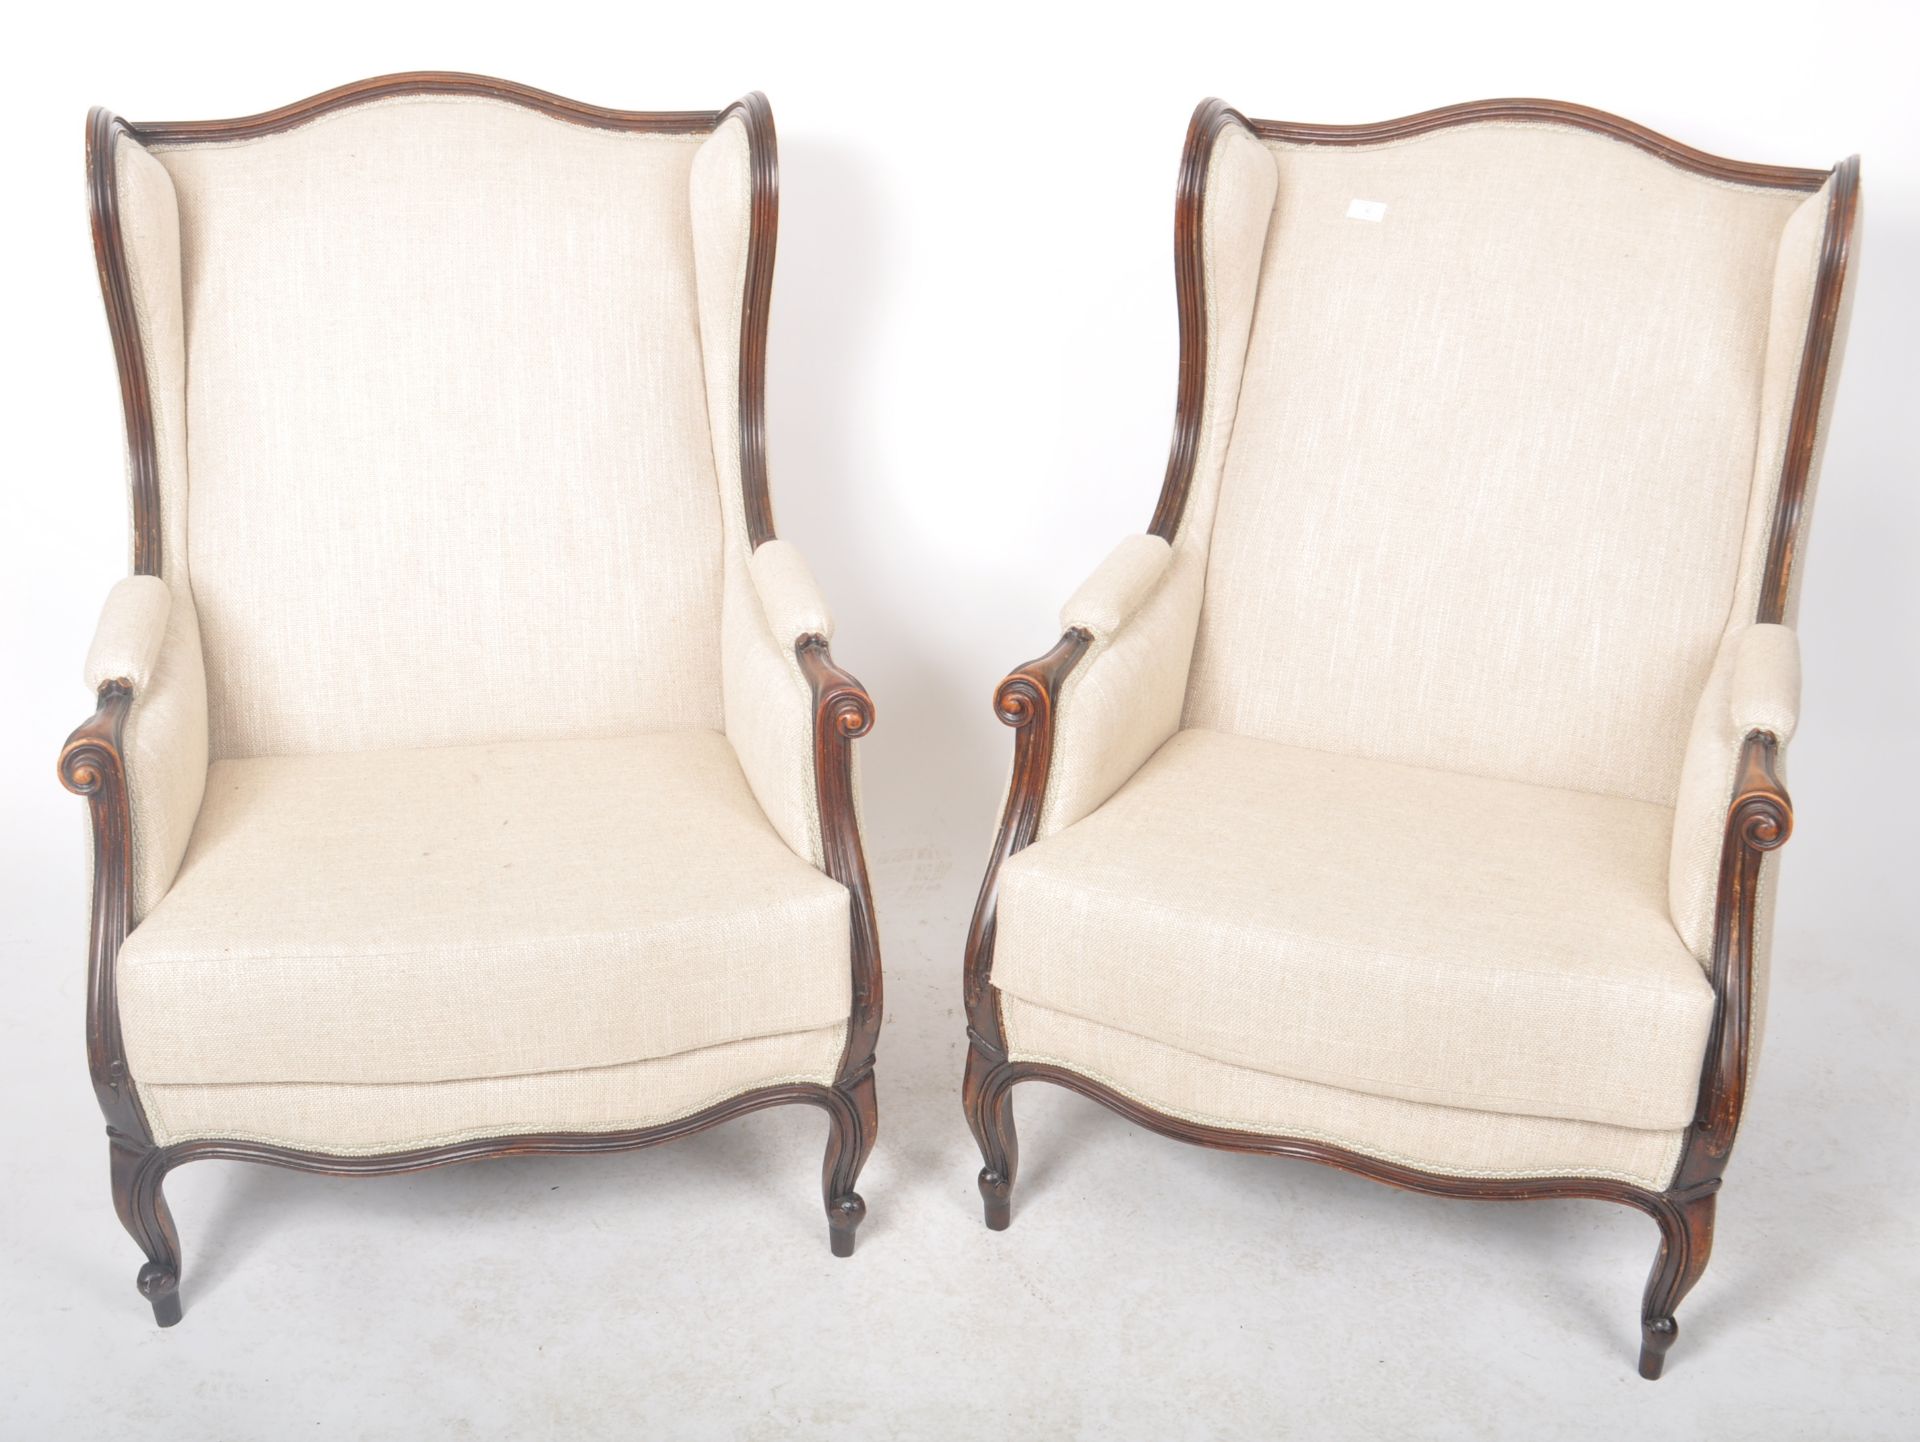 MATCHING PAIR OF 19TH CENTURY FRENCH WINGBACK ARMCHAIRS - Image 2 of 7